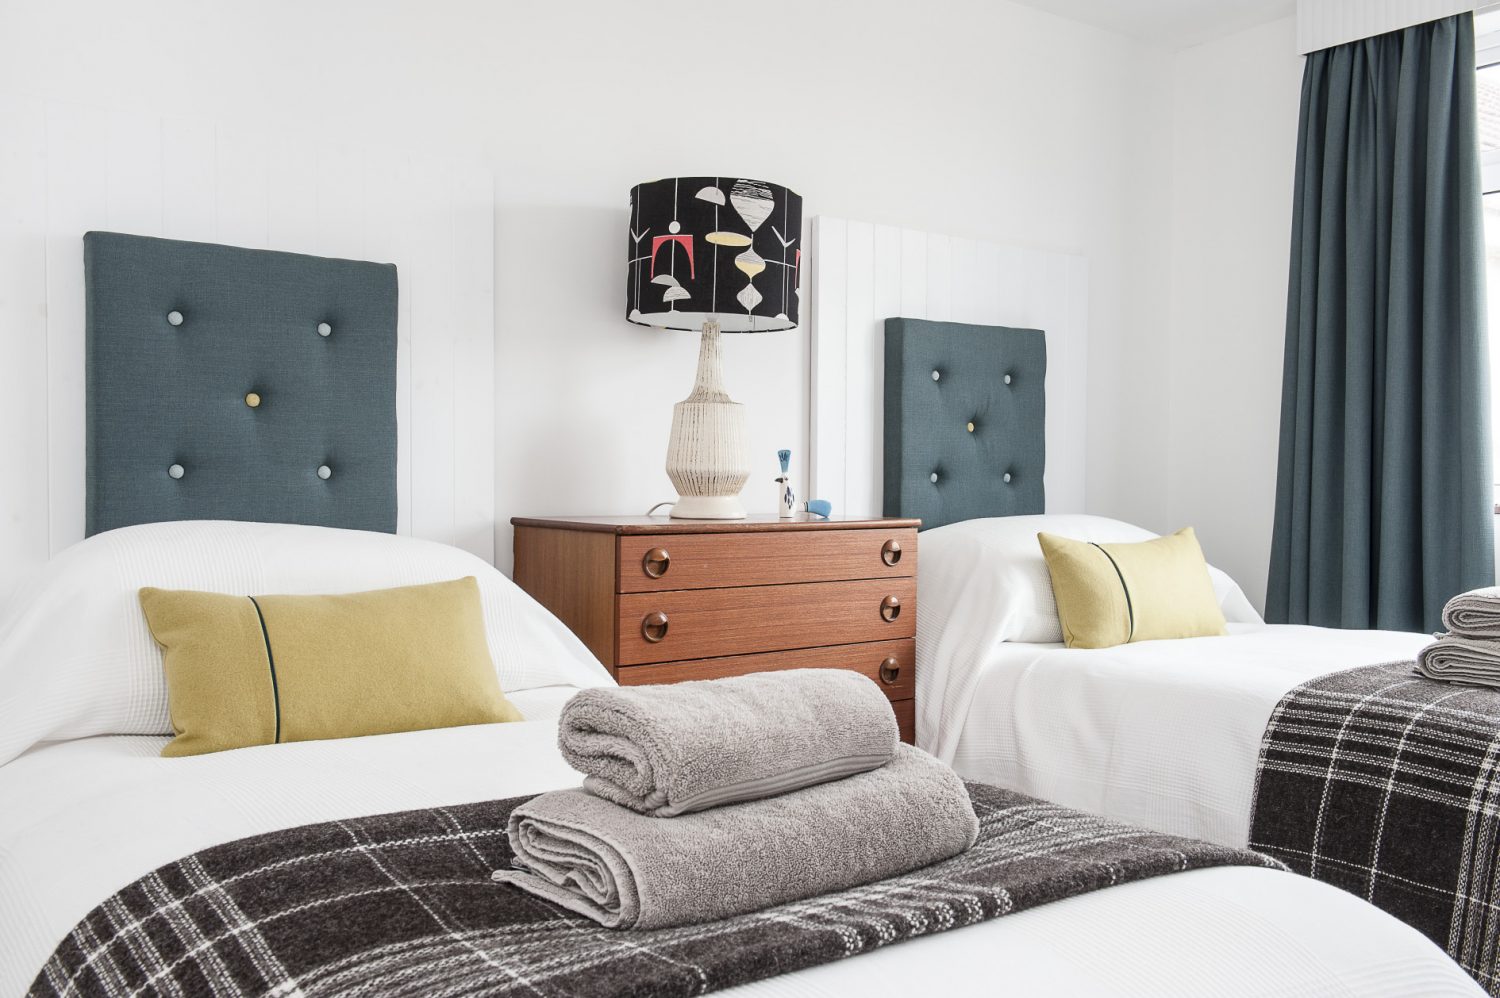 A third bedroom is nestled on the ground floor. James has once again employed his creative skills to make painted wooden headboards onto which he has mounted upholstered squares. A trio of framed album covers are mounted onto one wall